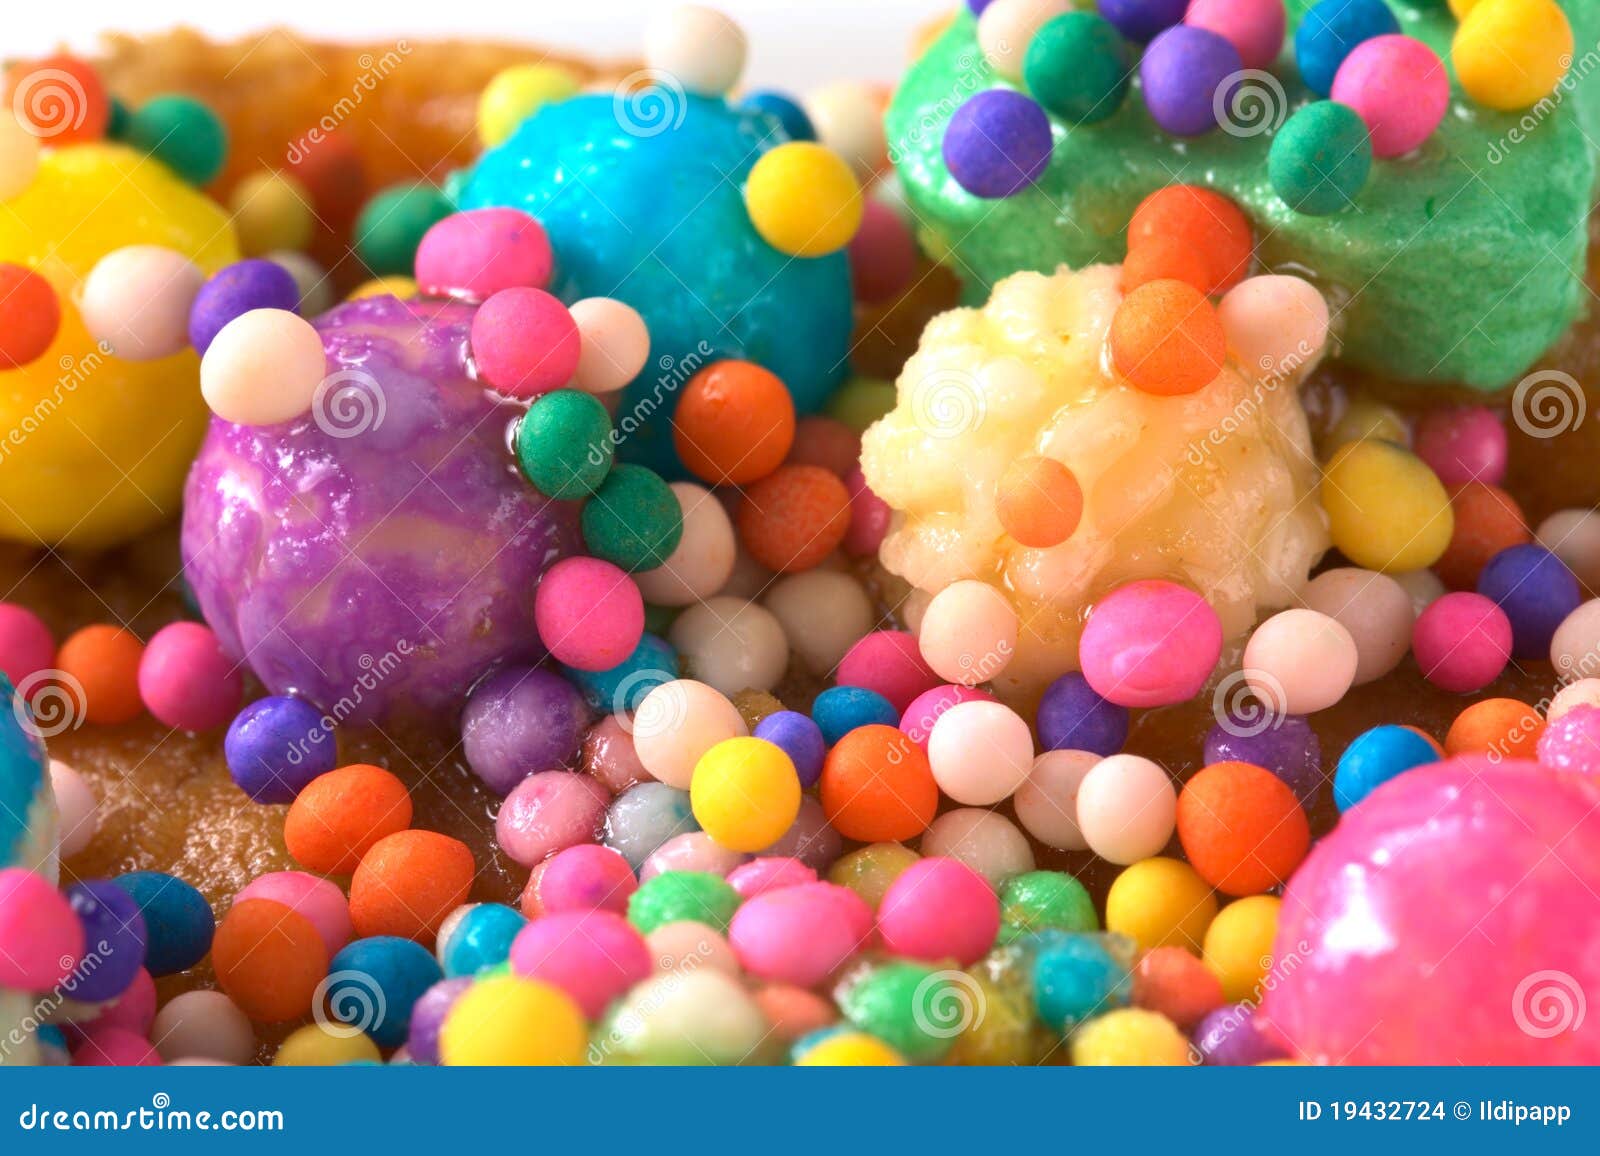 Colorful Sweet Candy Balls stock photo. Image of candy - 19432724